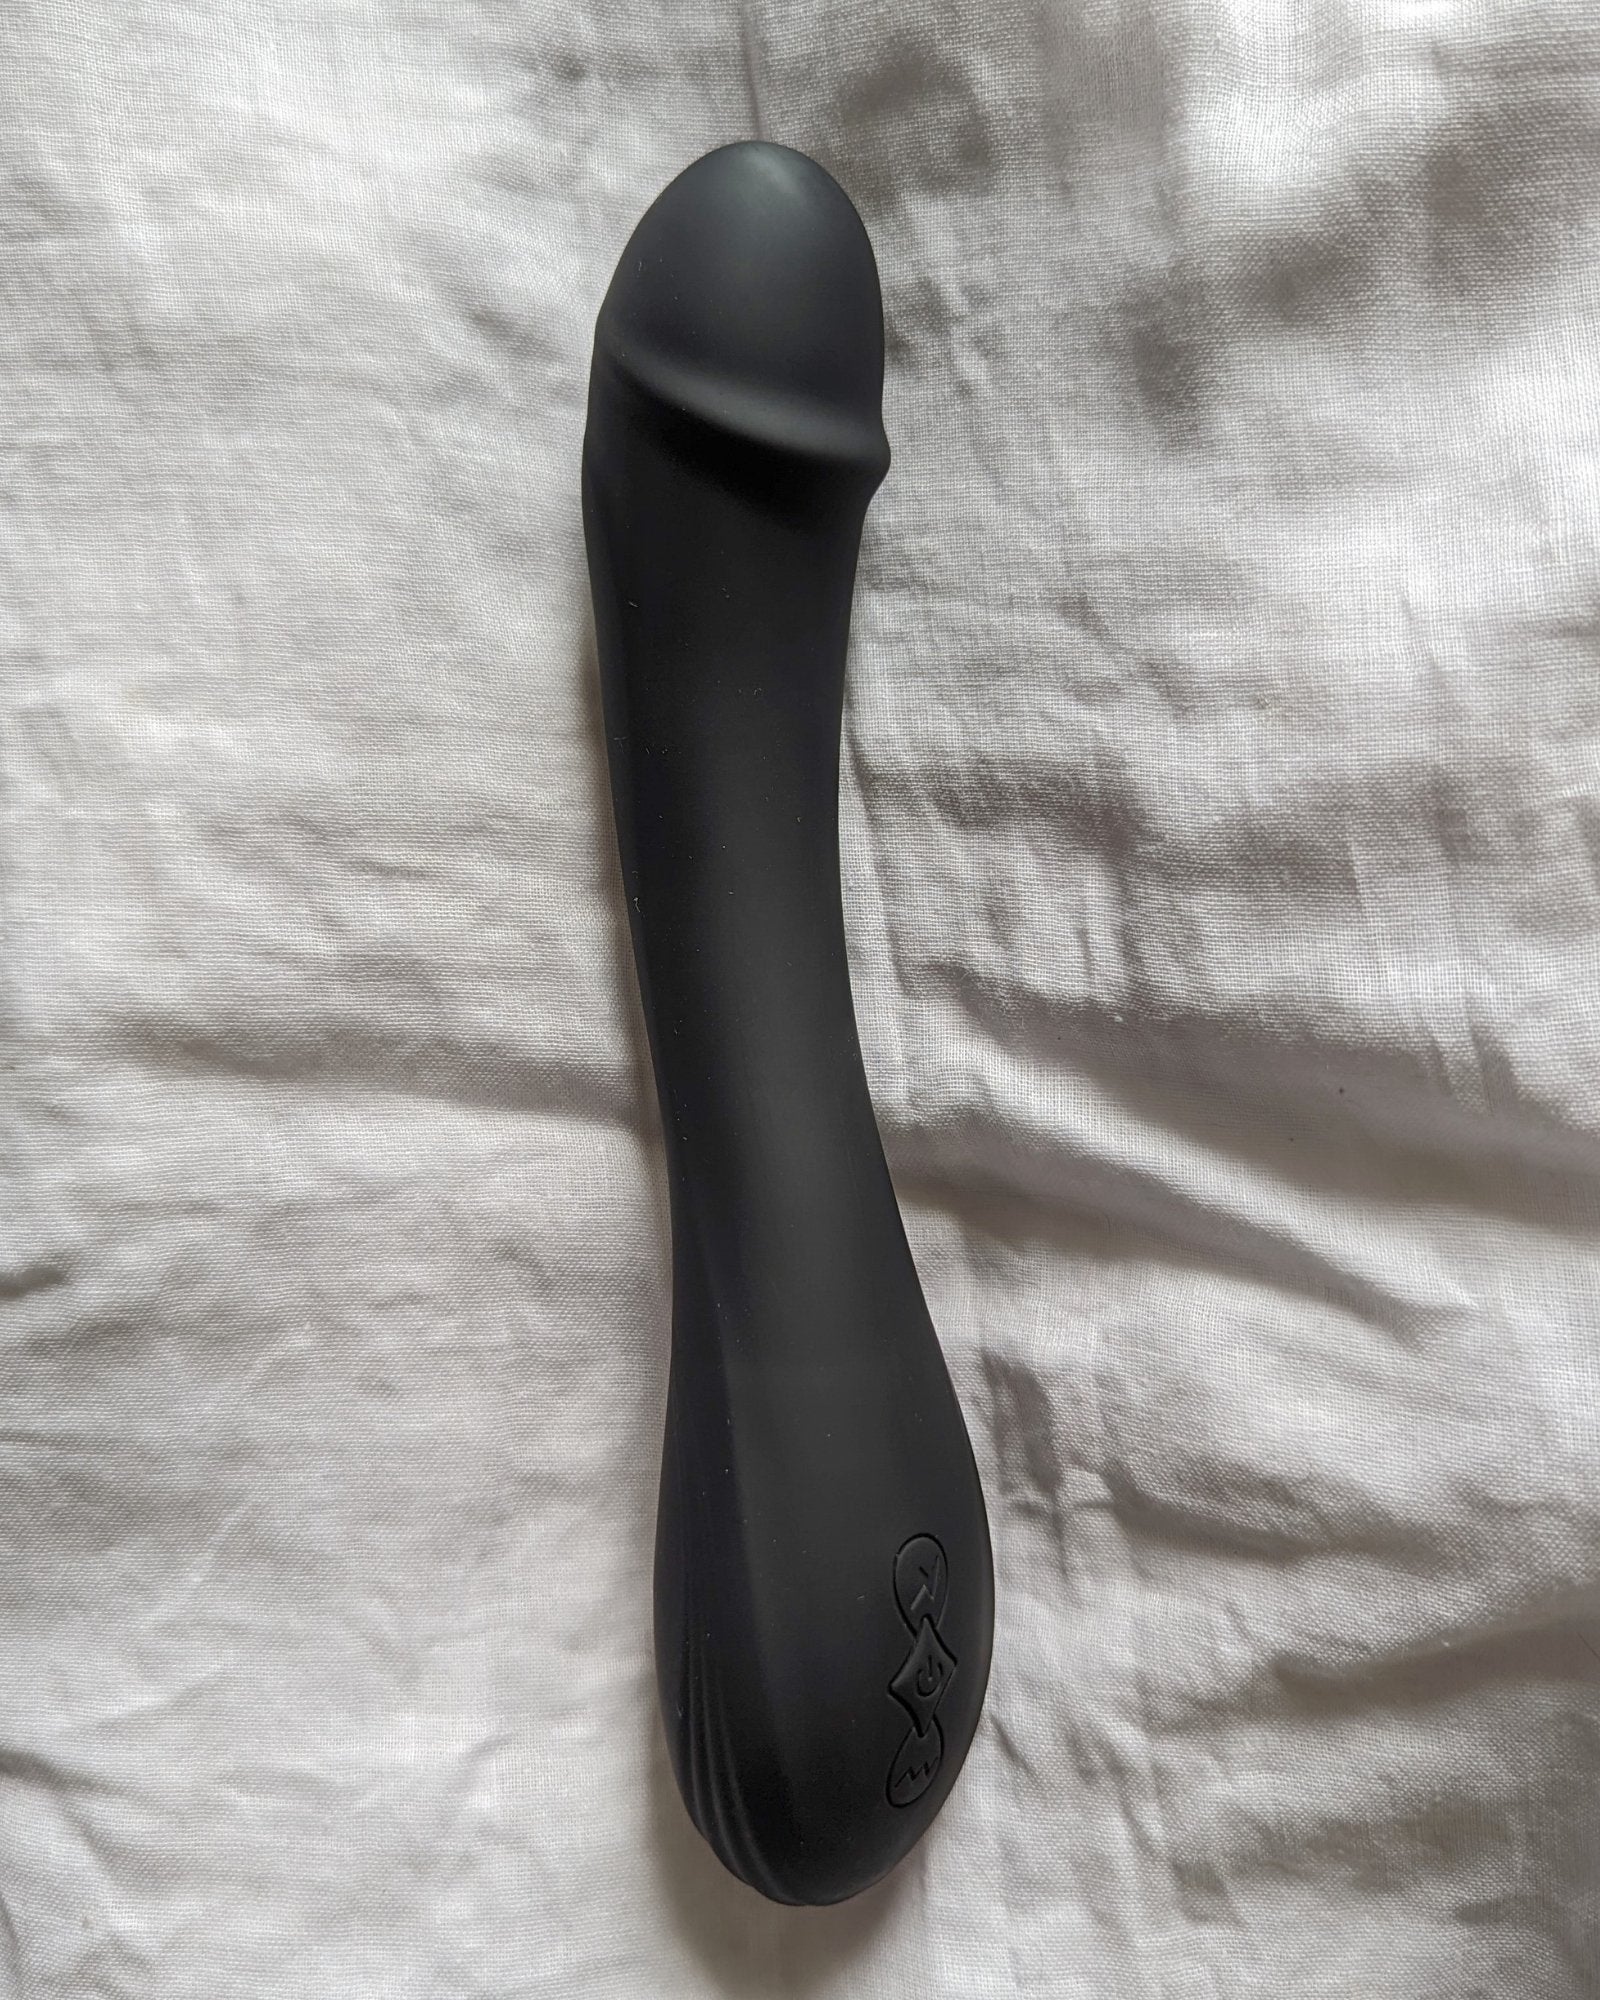 Sangya 55 - vibrator for gifting ideas for friends - sangyaproject